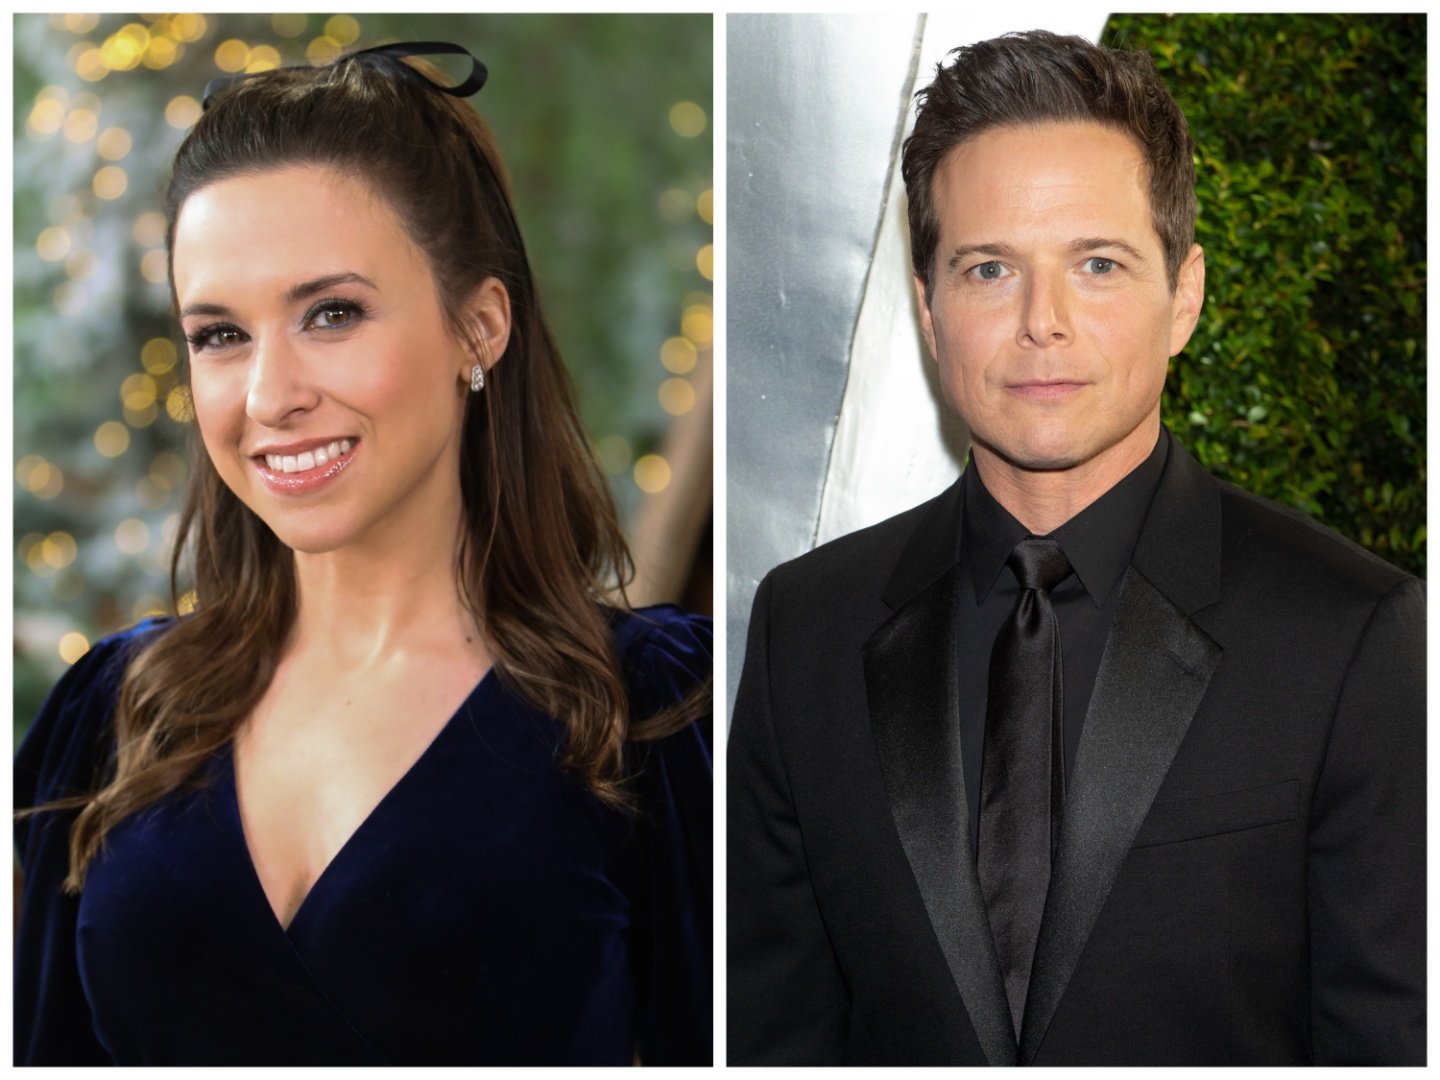 Side-by-side images of Lacey Chabert and Scott Wolf, both dressed in black